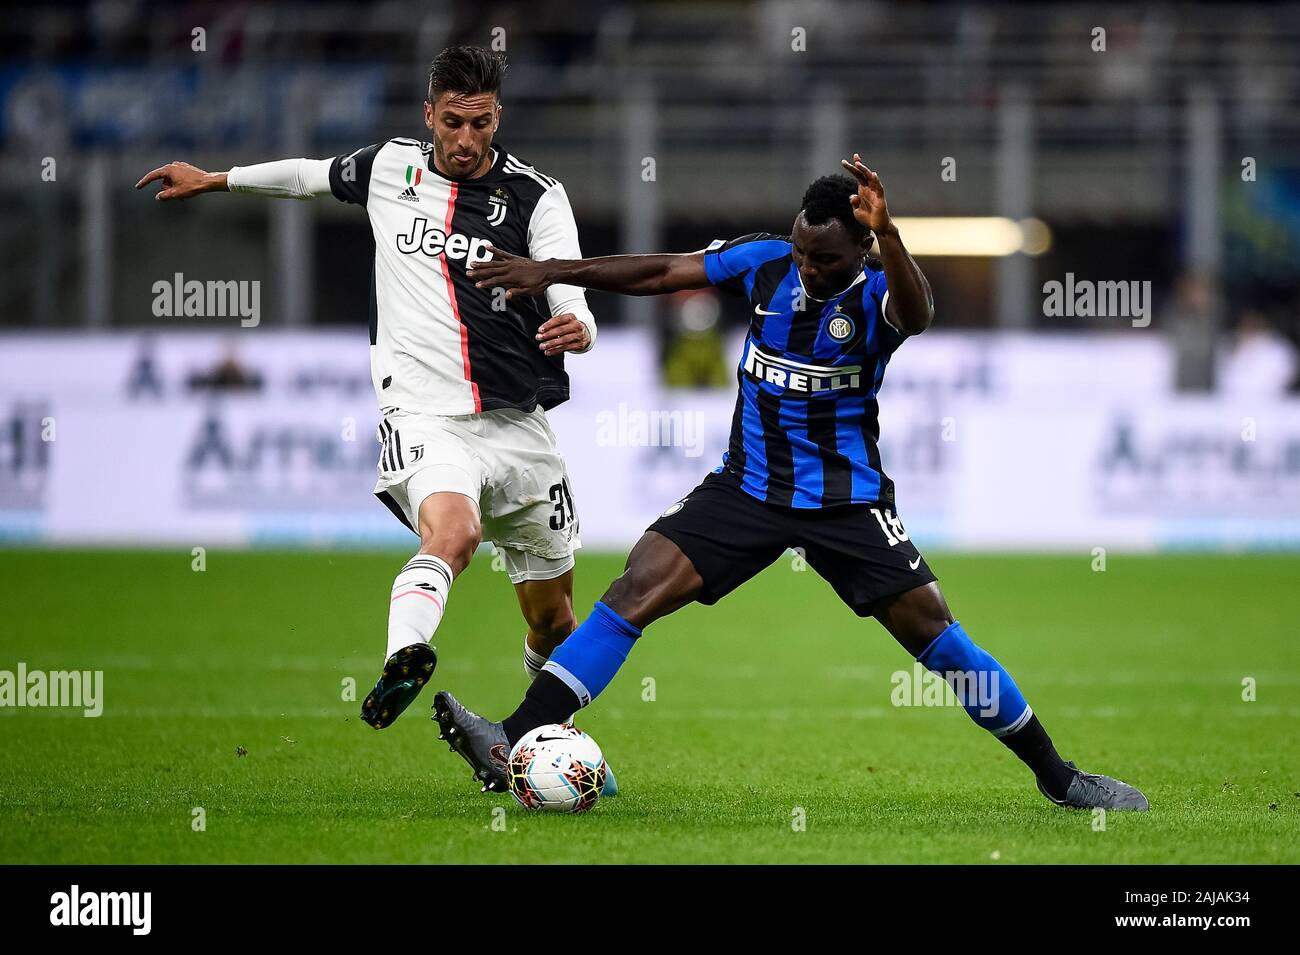 Milan, Italy. 6 October, 2019: Kwadwo Asamoah (R) of FC Internazionale competes for the ball with Rodrigo Bentancur of Juventus FC during the Serie A football match between FC Internazionale and Juventus FC. Juventus FC won 2-1 over FC Internazionale. Credit: Nicolò Campo/Alamy Live News Stock Photo